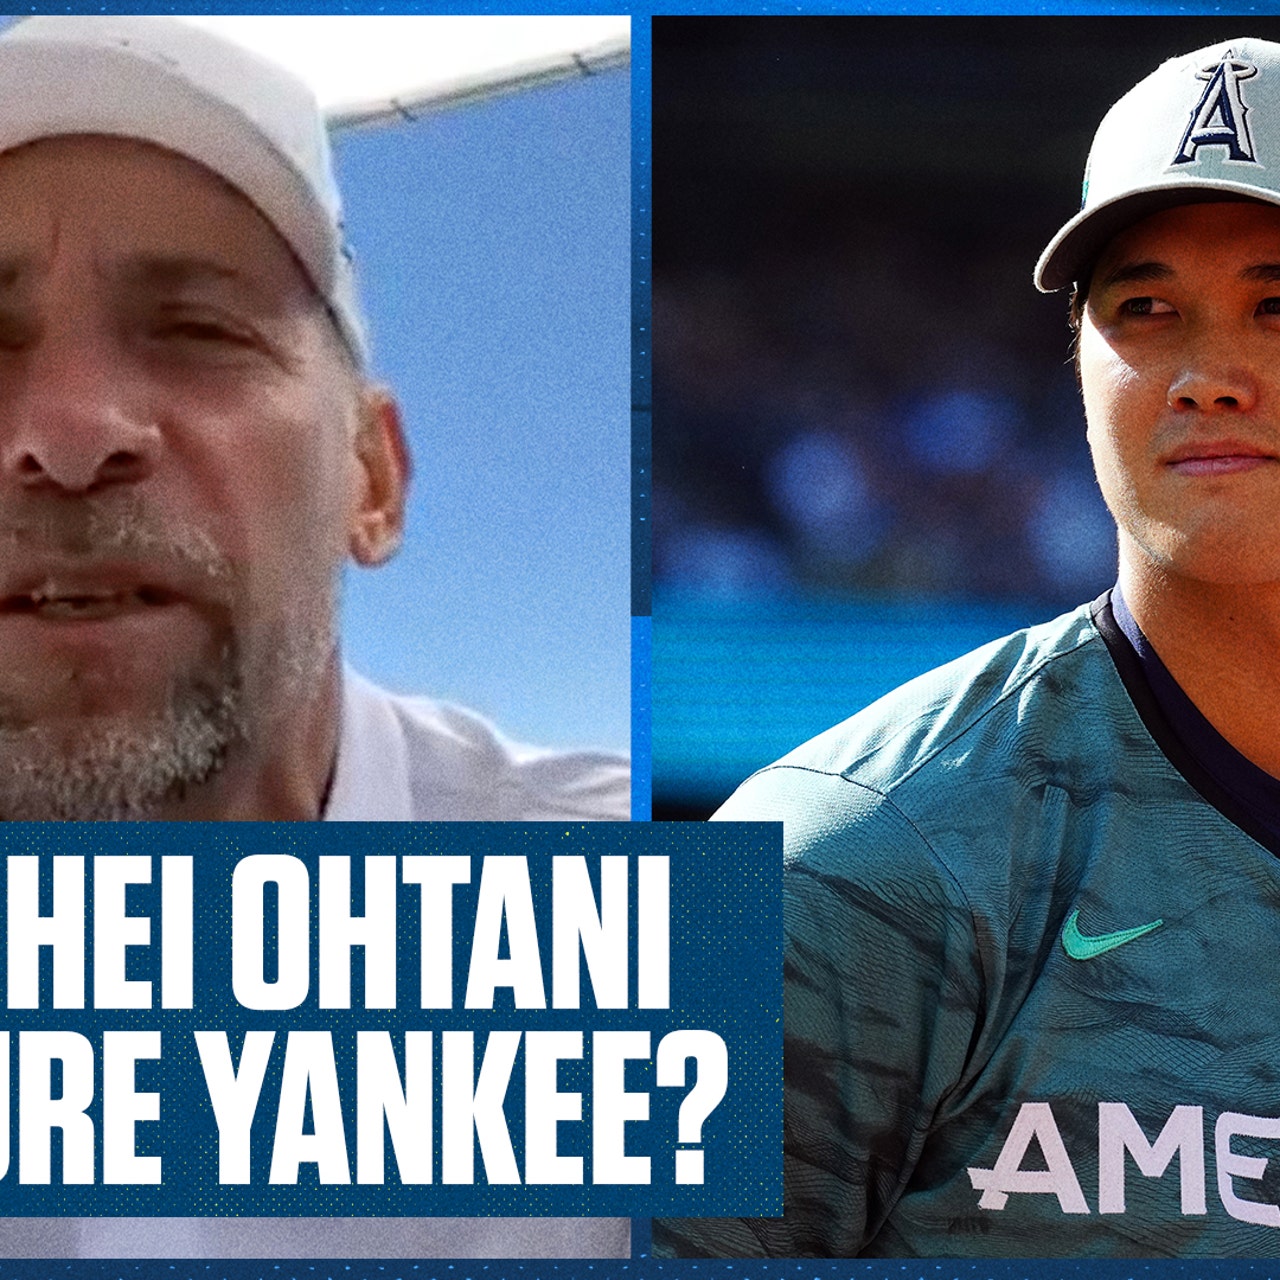 Shohei Ohtani to the Yankees? John Smoltz weighs in on Ohtani sweepstakes, Flippin' Bats